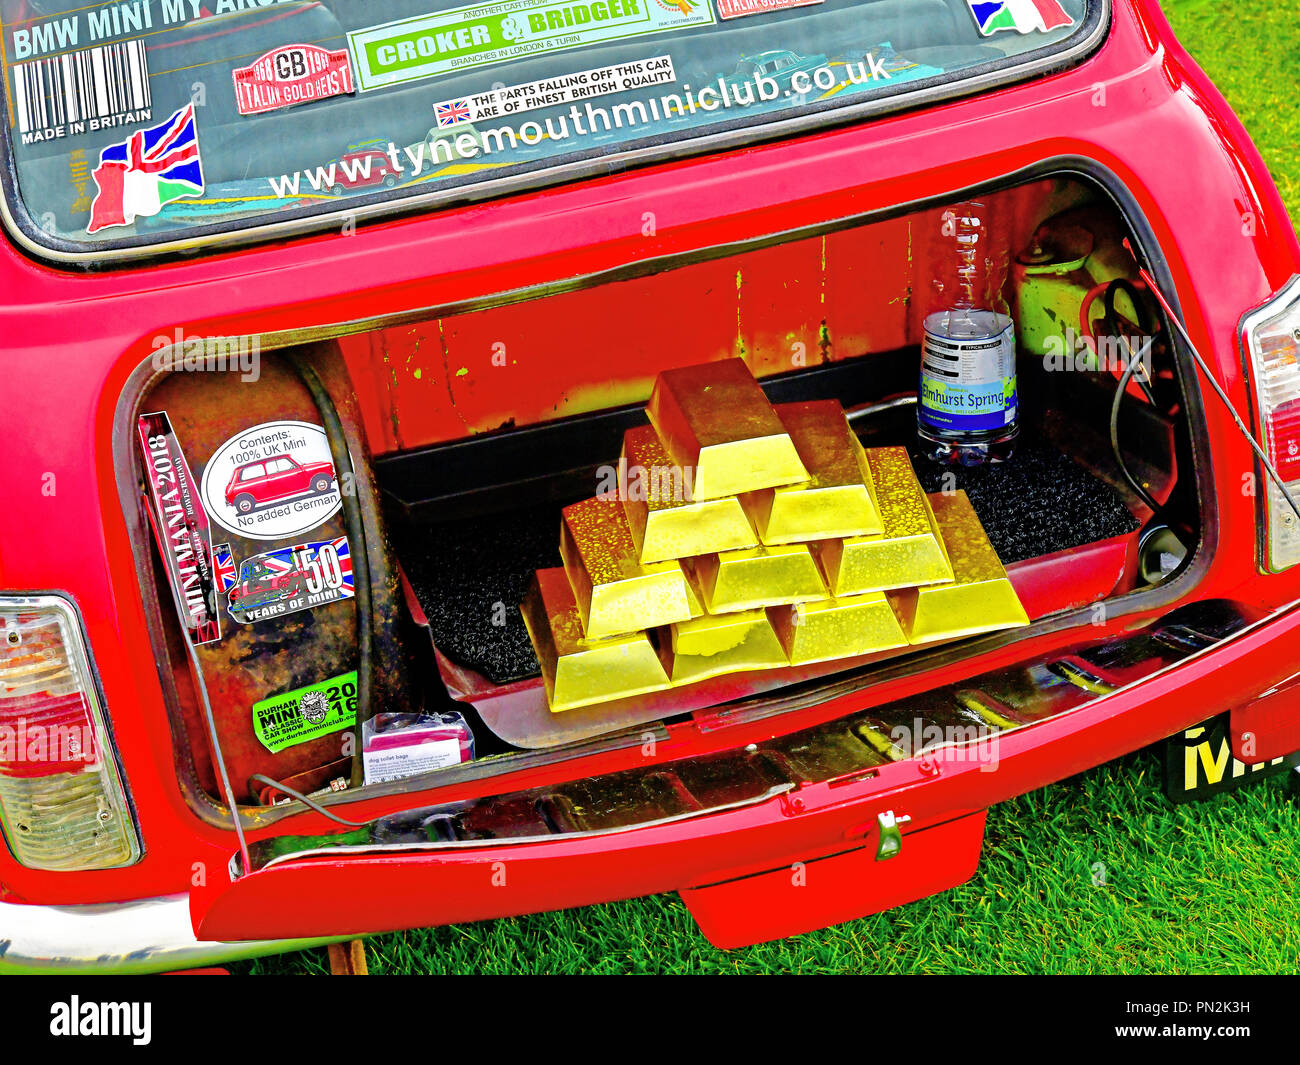 Whitley Bay Motor Show vintage red BMC Italian Job Mini mockup complete with gold bars Stock Photo